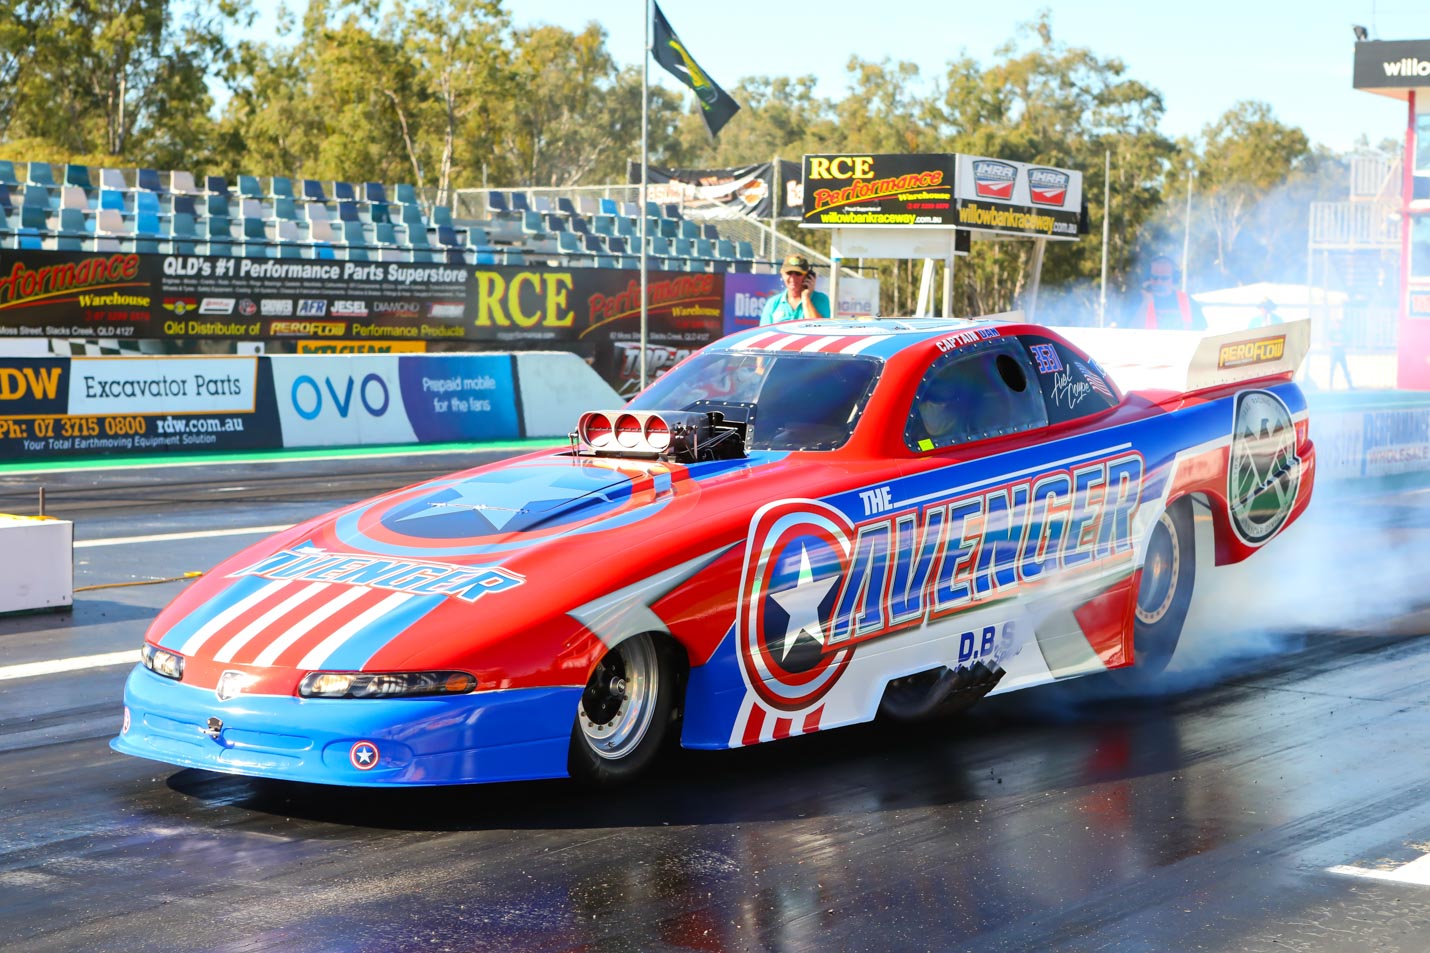 Photo supplied by Aeroflow Outlaw Nitro Funny Cars